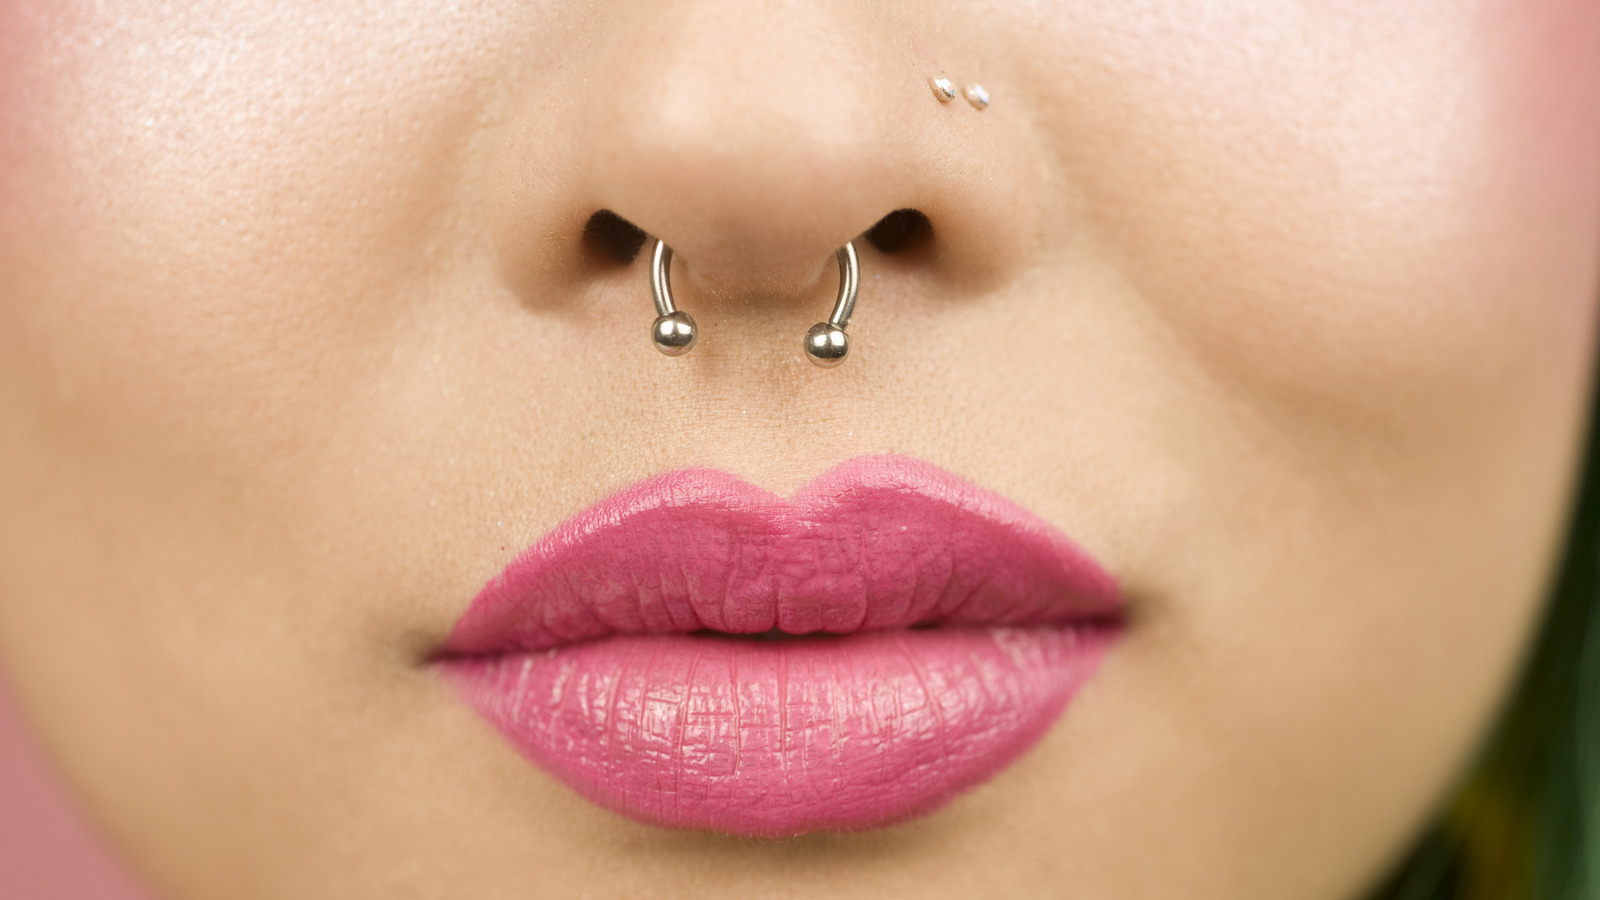 Take Care Of Your Nostril Piercing With These 5 Easy Steps